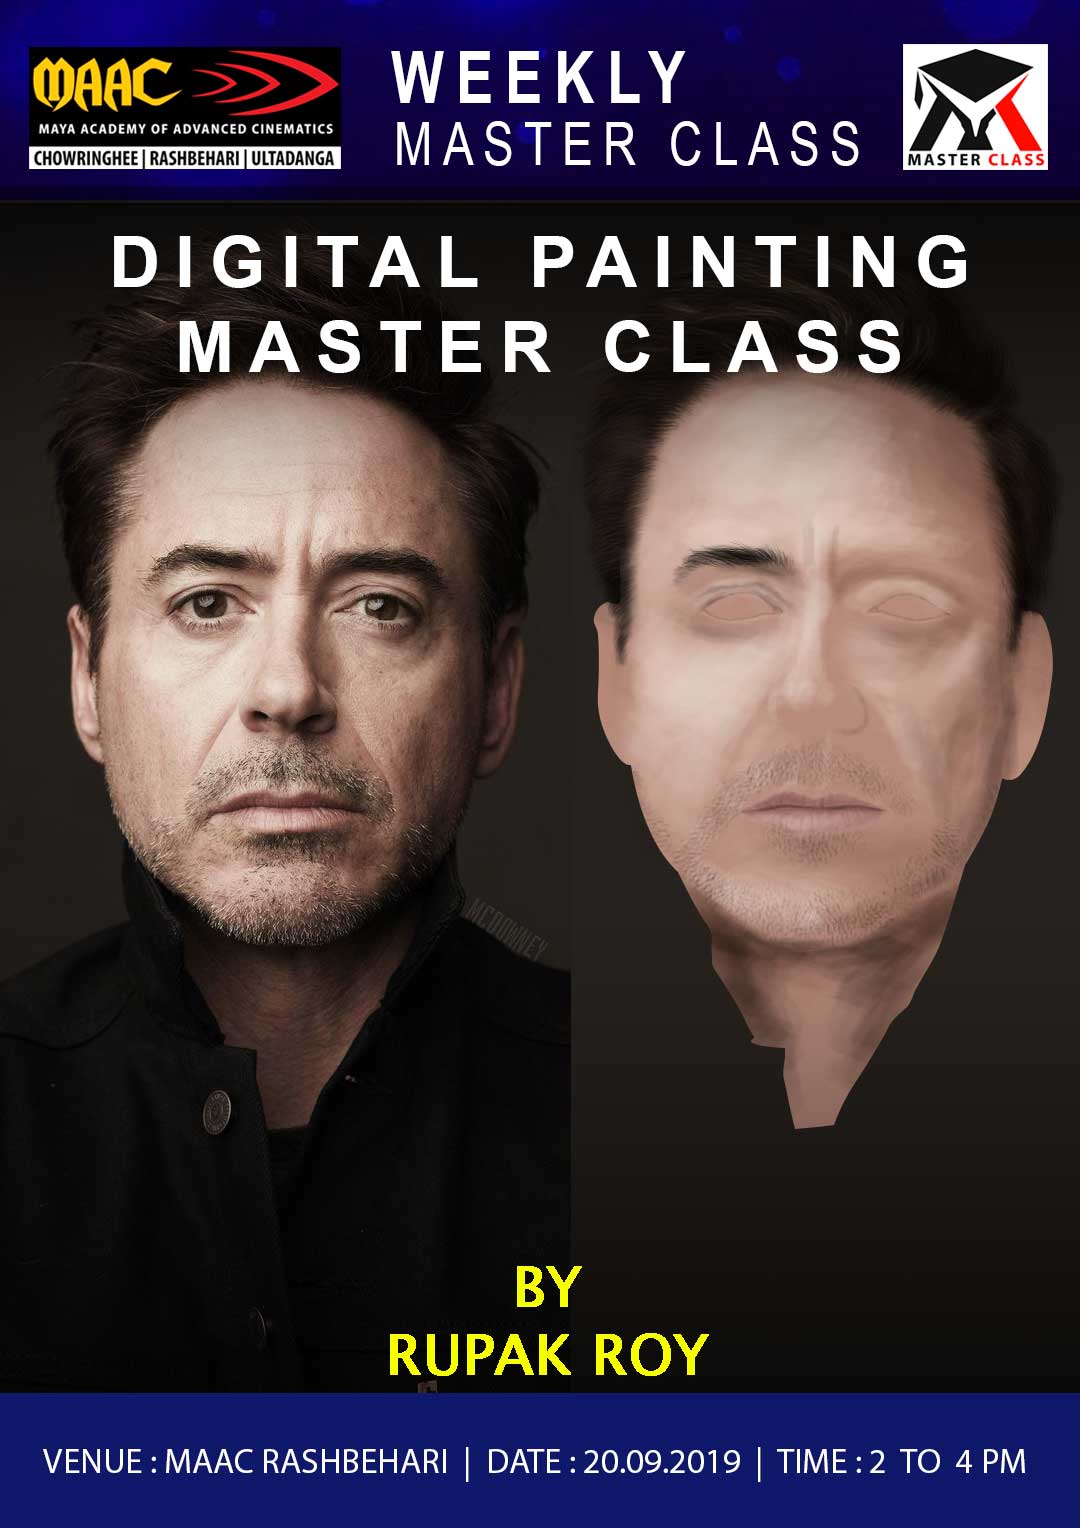 Weekly Master Class on Digital painting